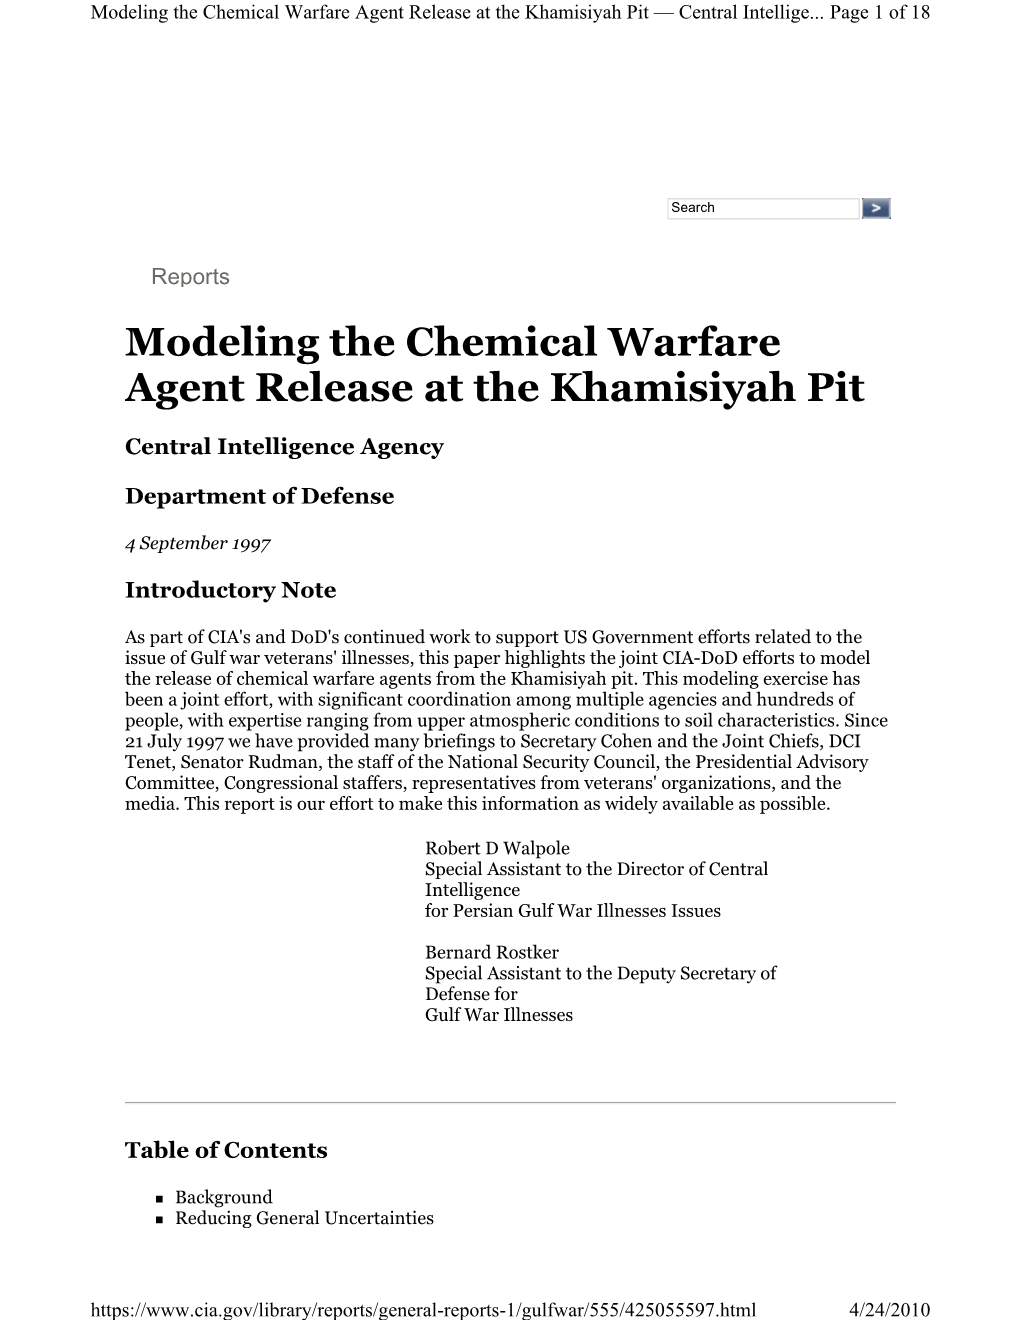 Modeling the Chemical Warfare Agent Release at the Khamisiyah Pit — Central Intellige